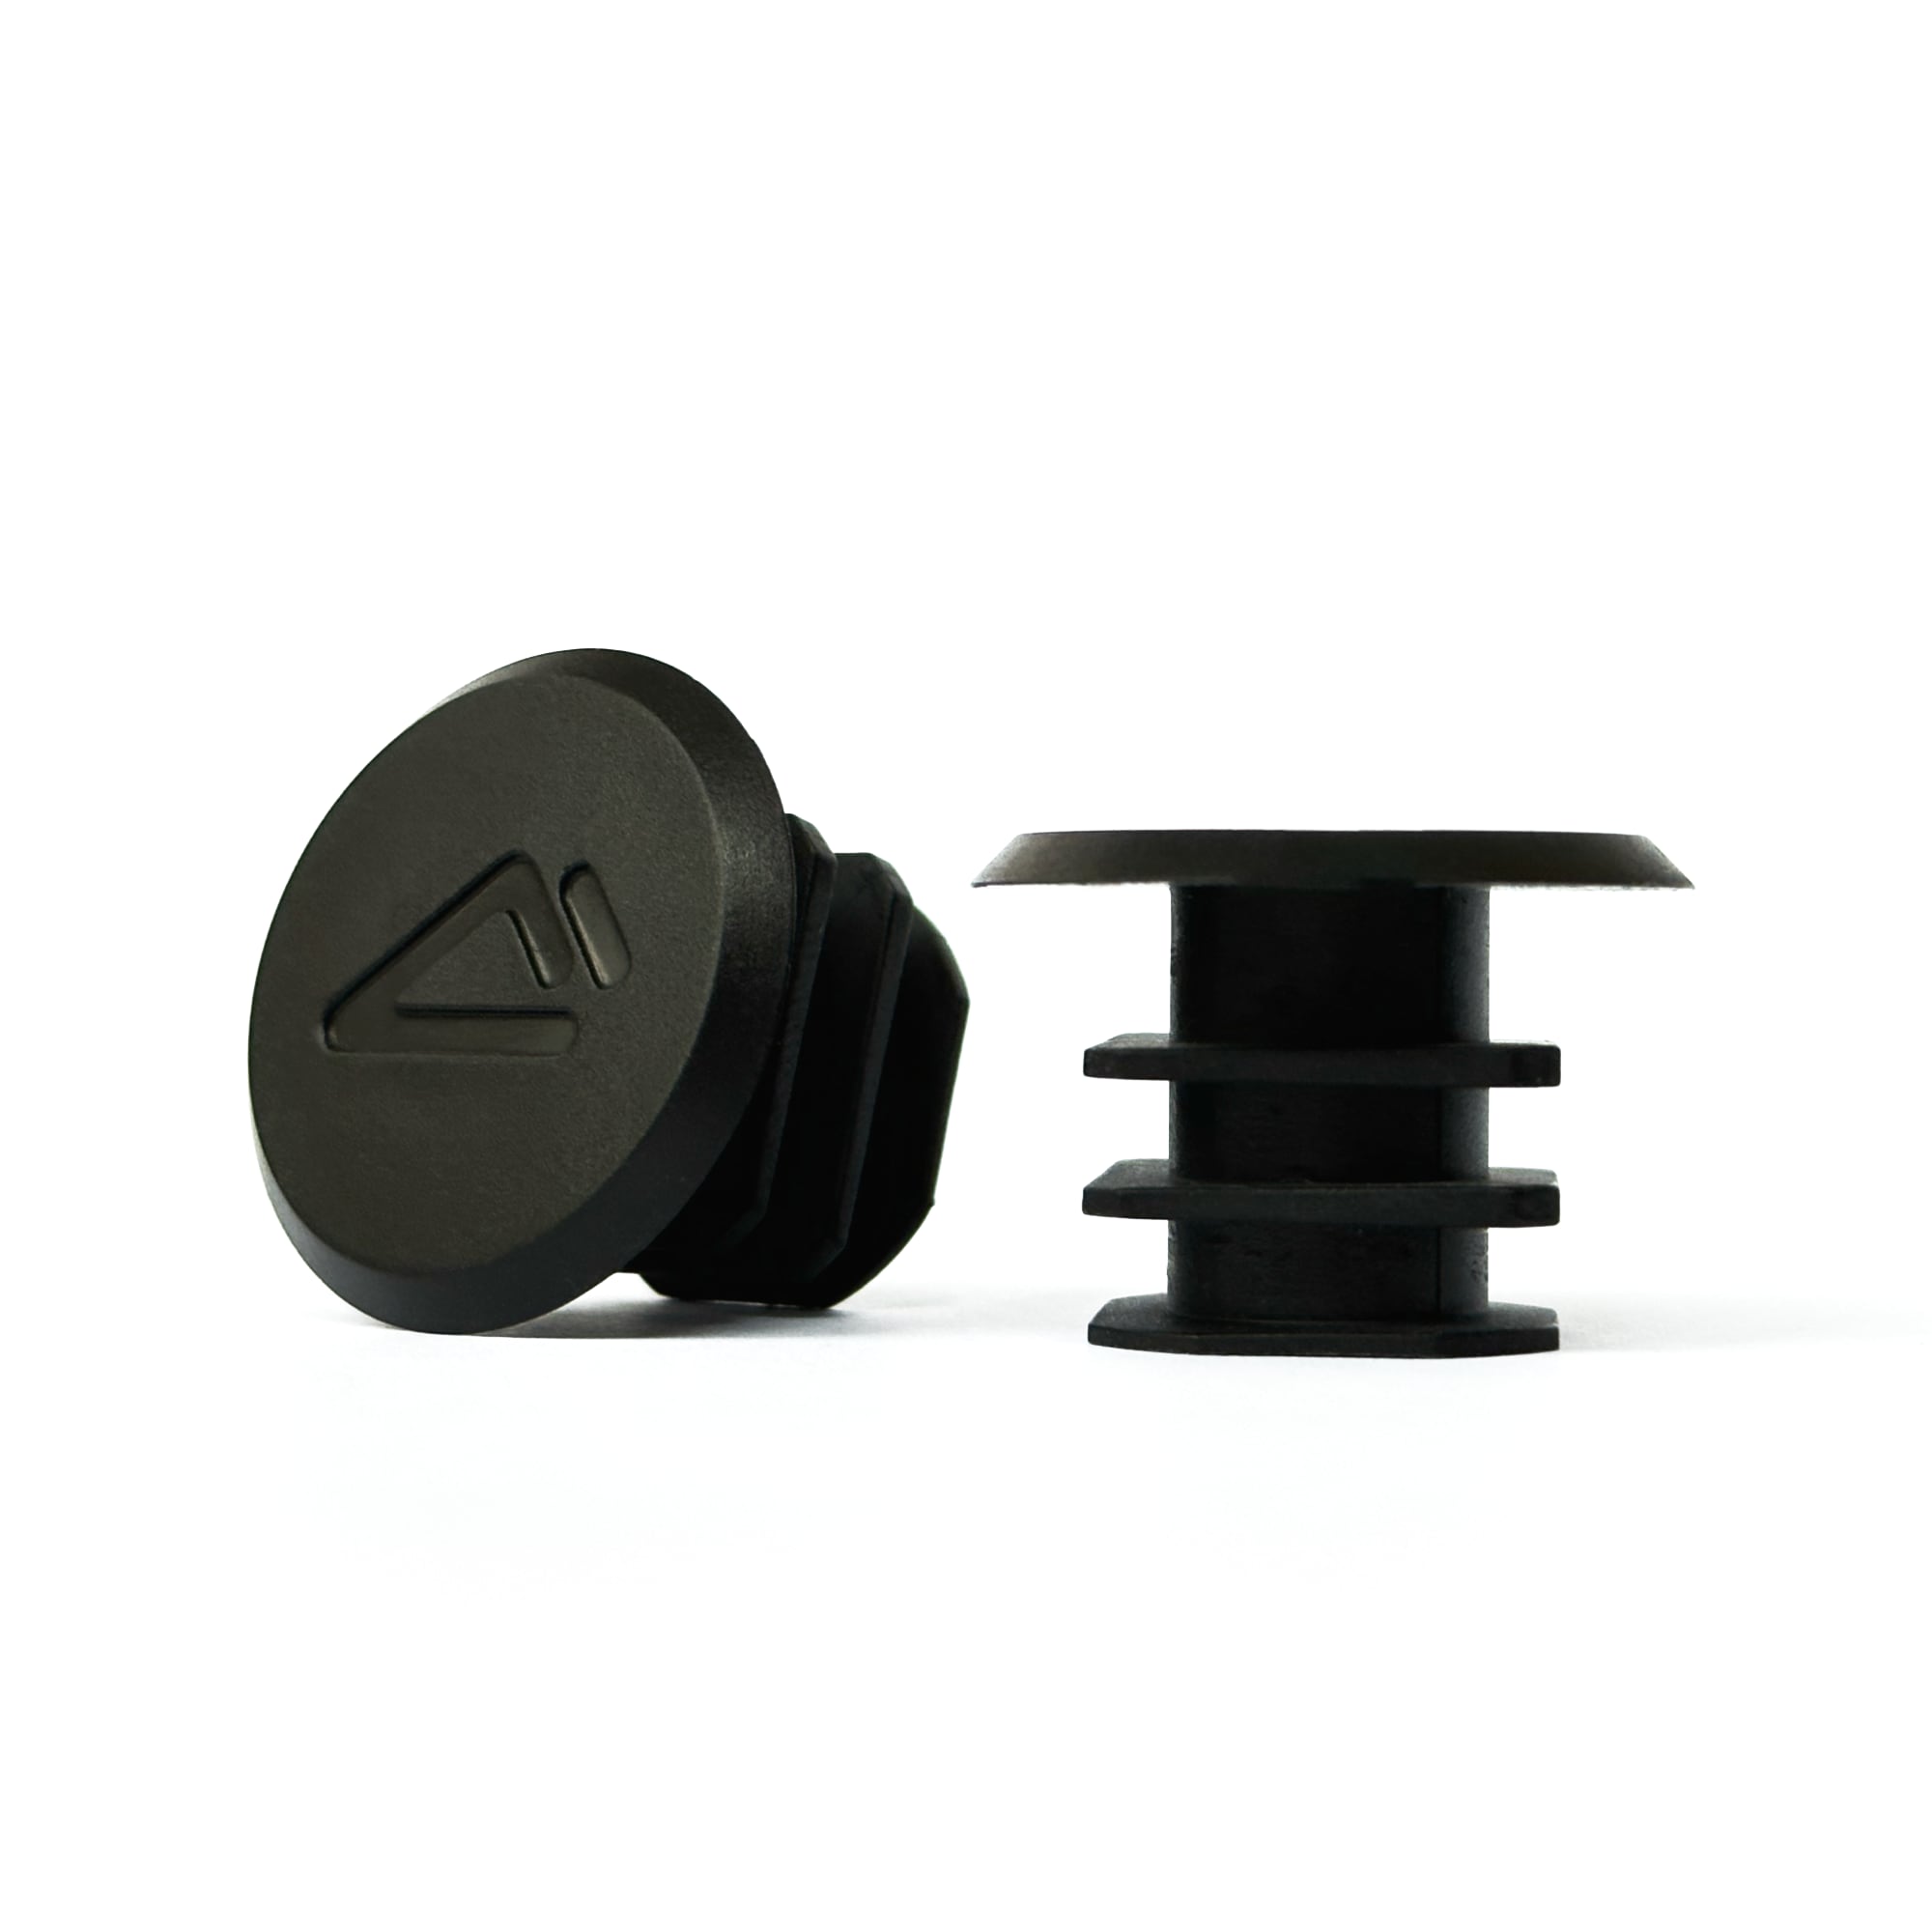 Extra end plugs